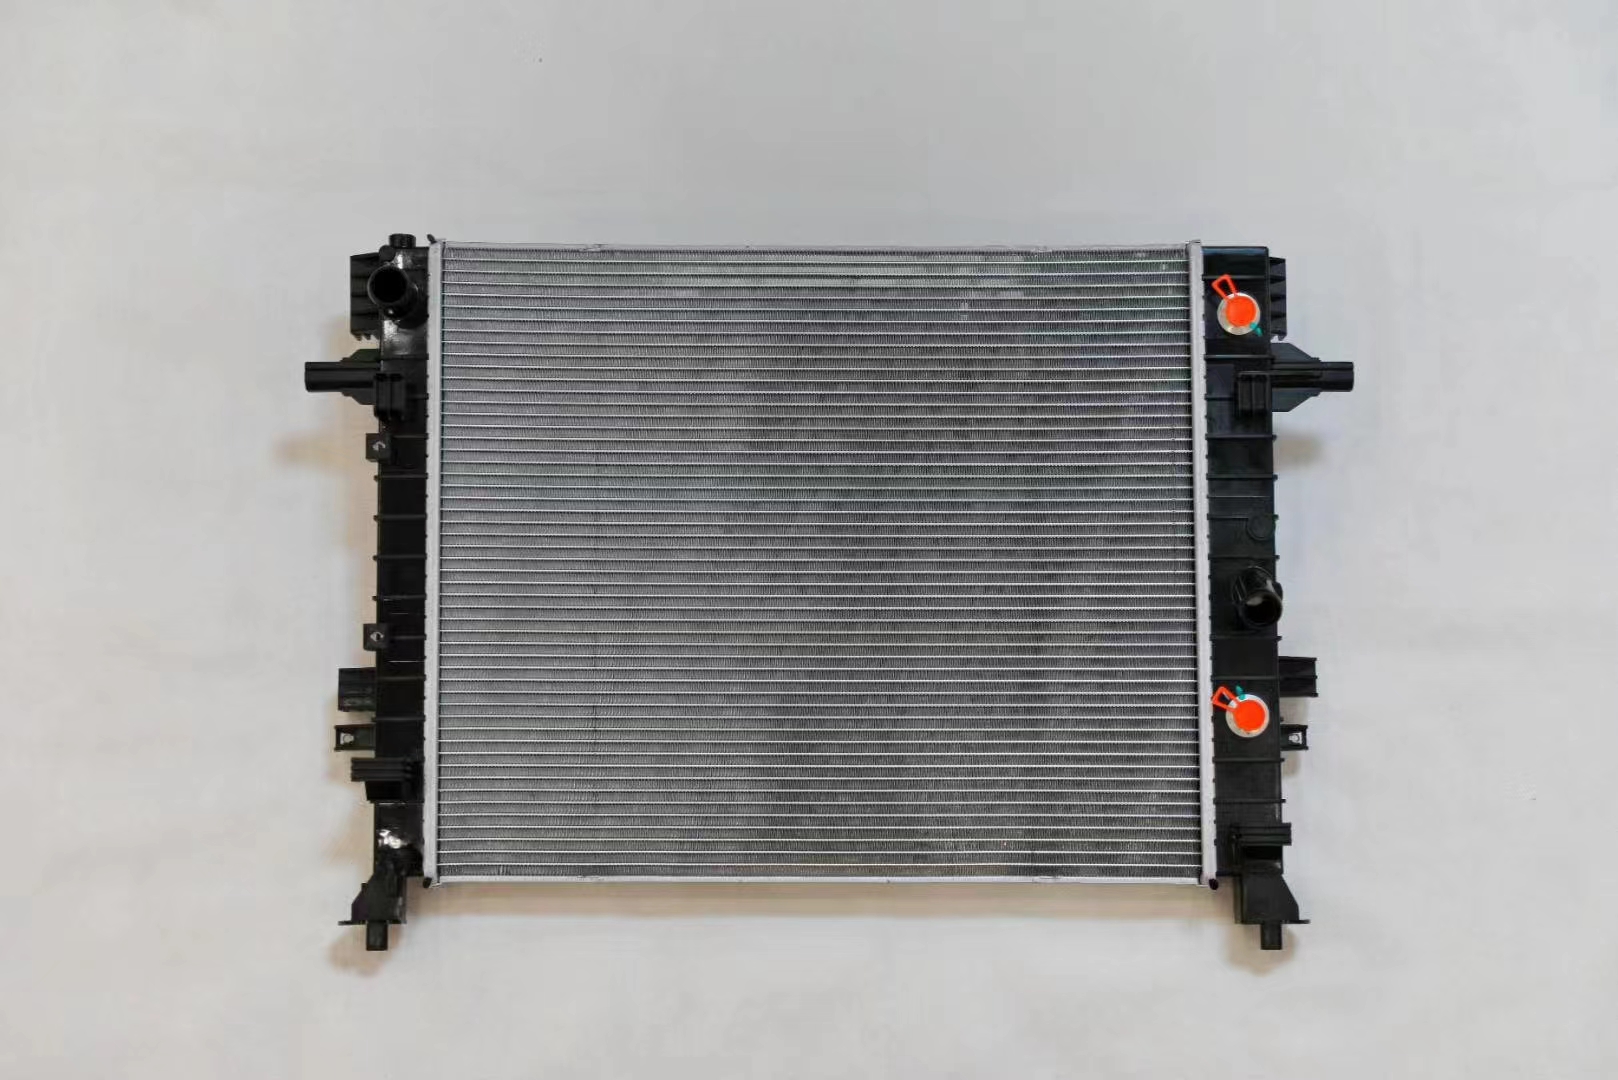 New energy vehicle cooling technology: comparison between water cooling and air cooling